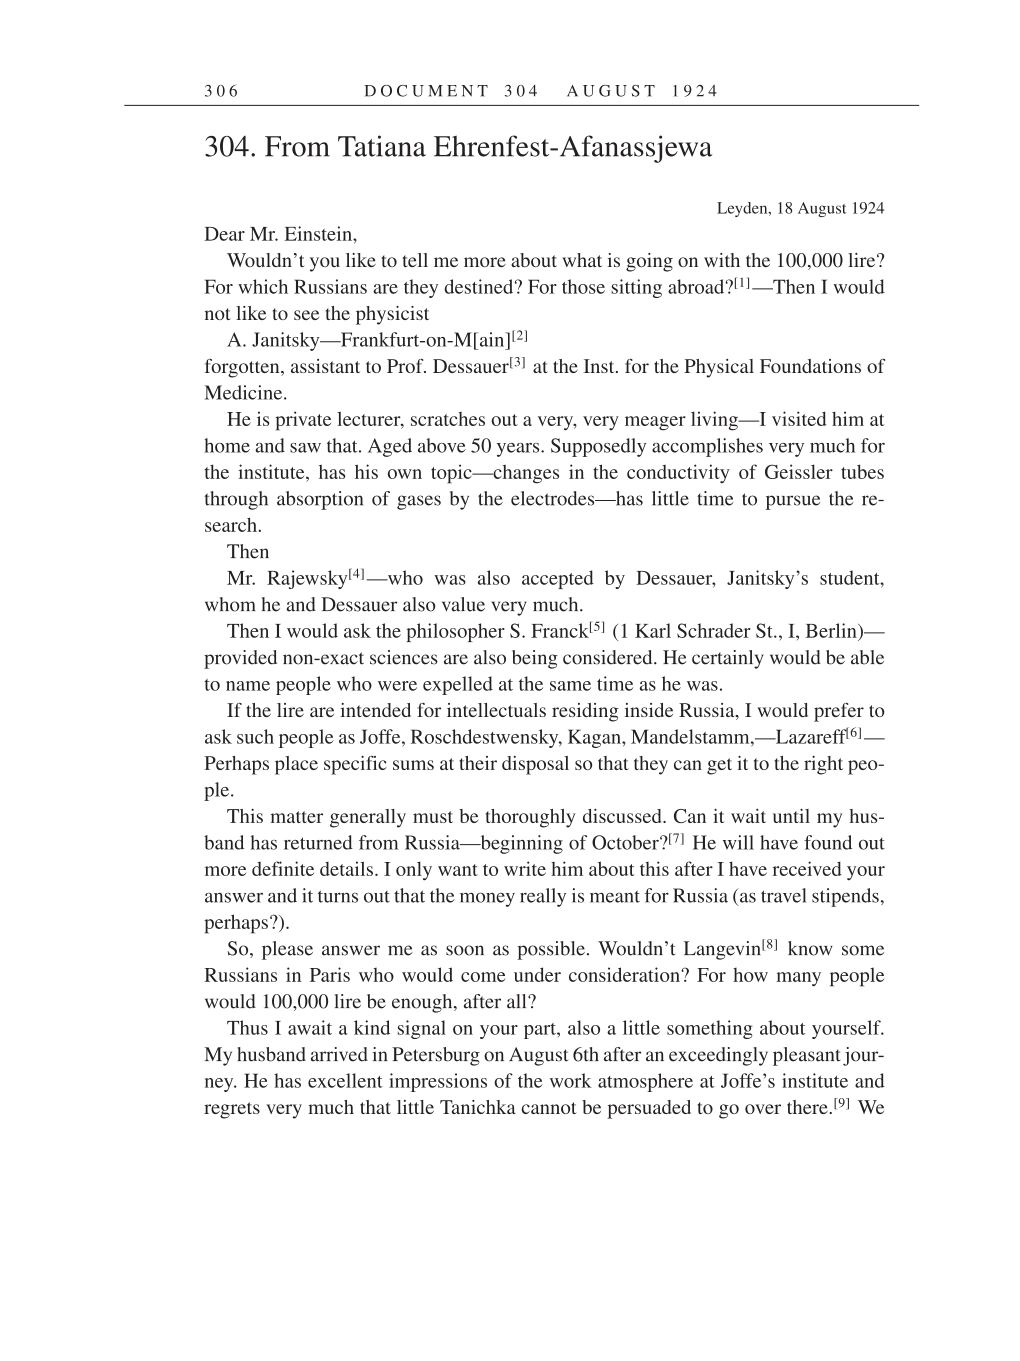 Volume 14: The Berlin Years: Writings & Correspondence, April 1923-May 1925 (English Translation Supplement) page 306